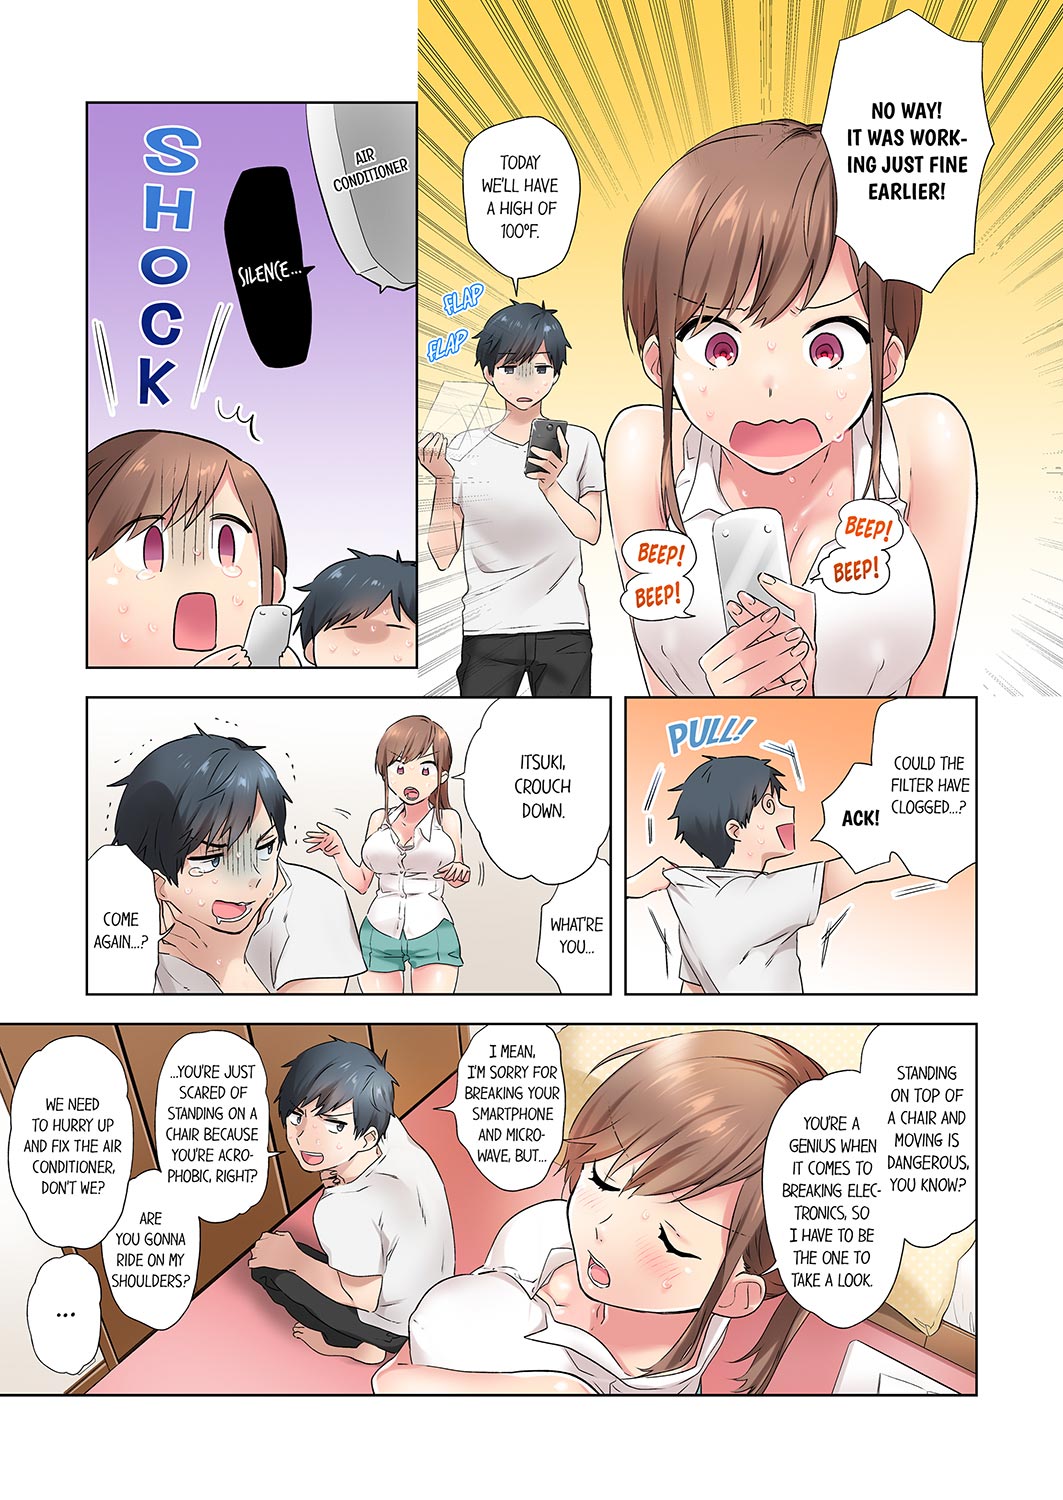 A Scorching Hot Day with A Broken Air Conditioner - Chapter 1 Page 5